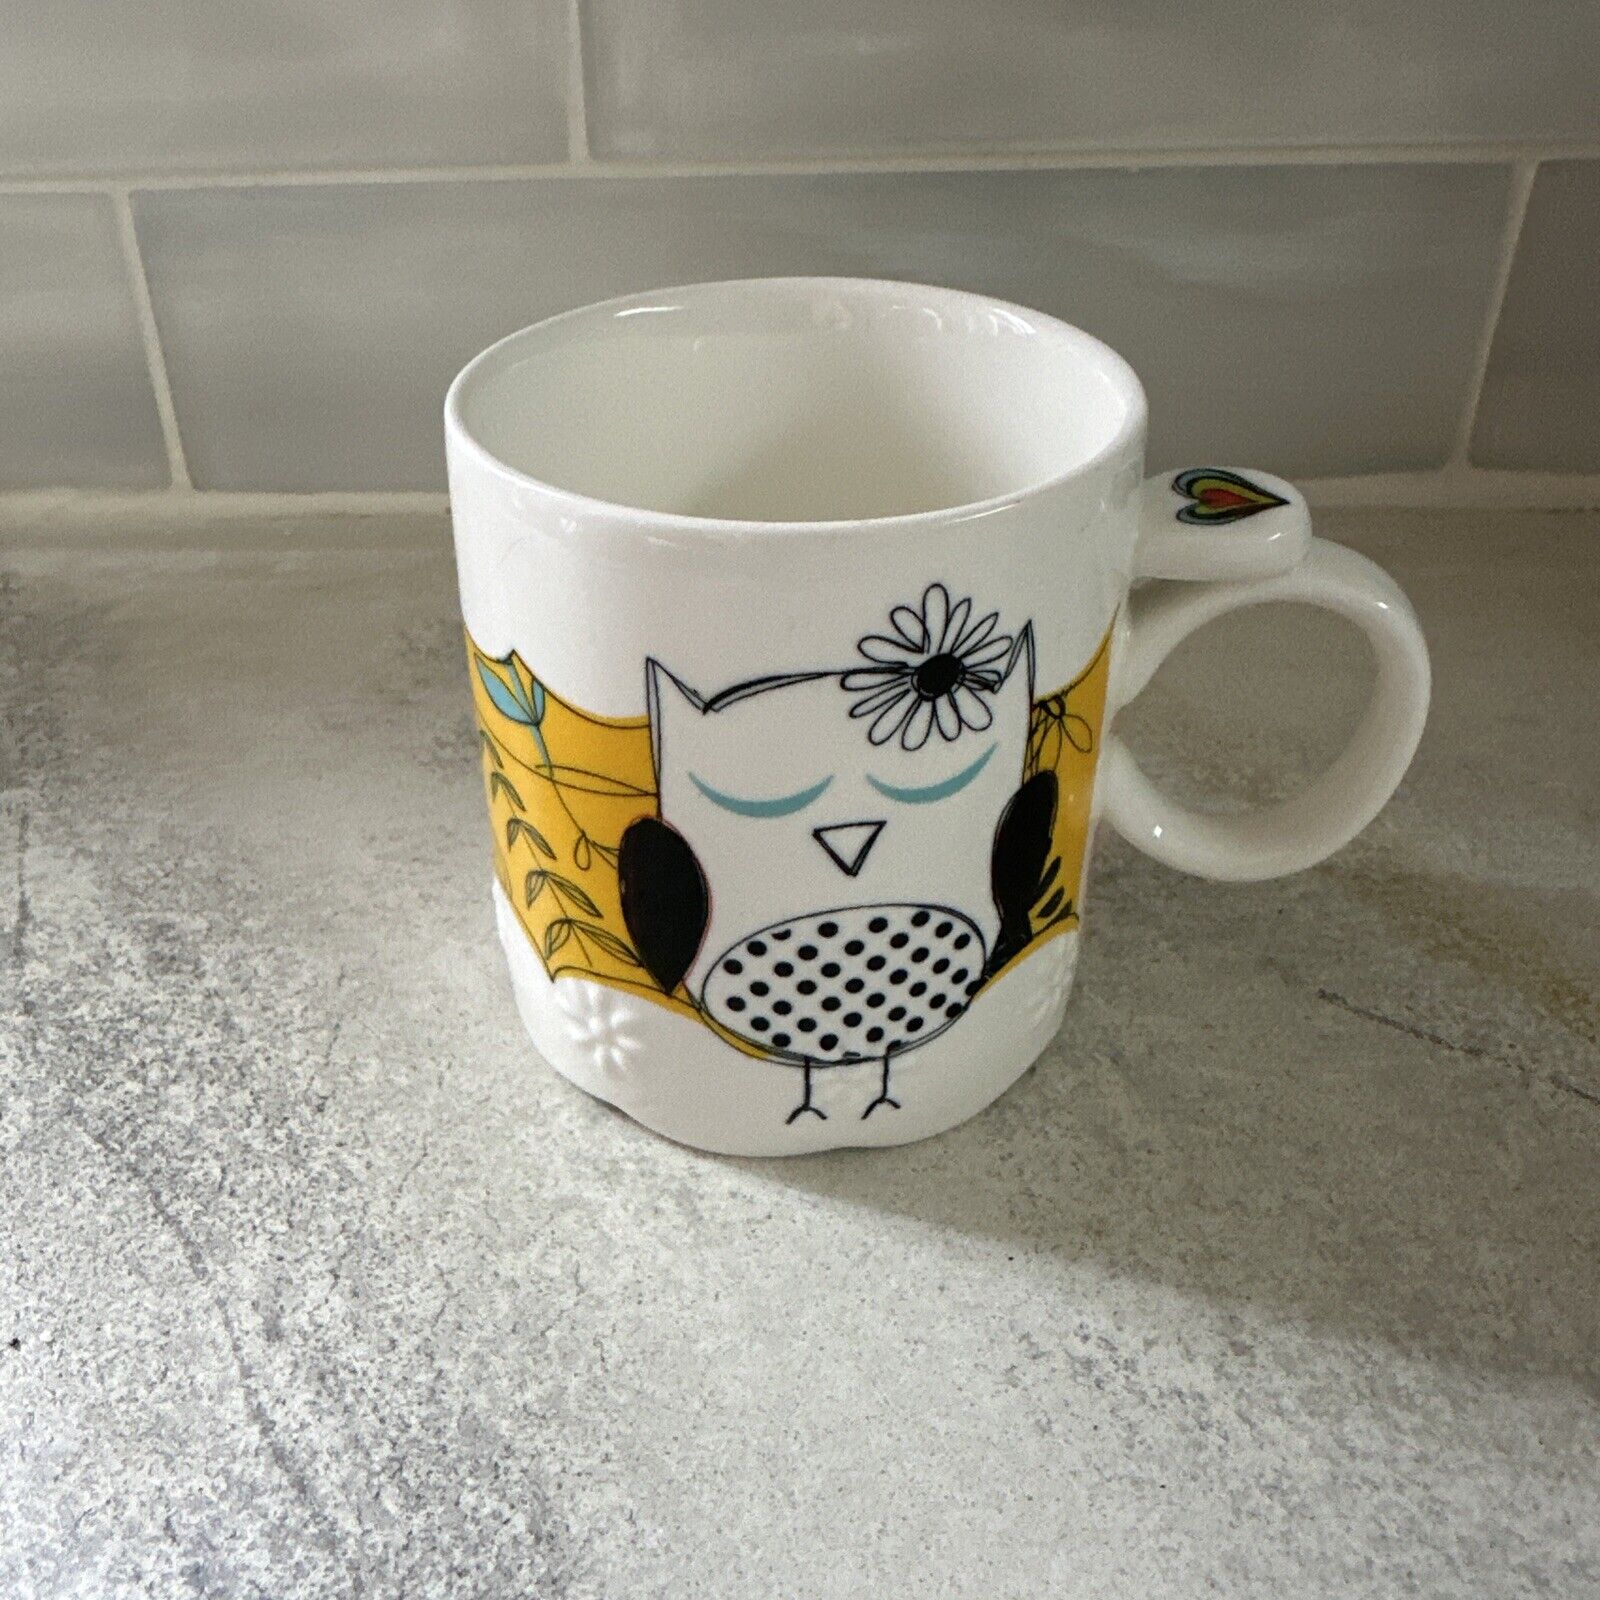 Love Owl Mug Amylee Weeks a Friend Loves at All Times 2013 Ceramic Cup 12 oz